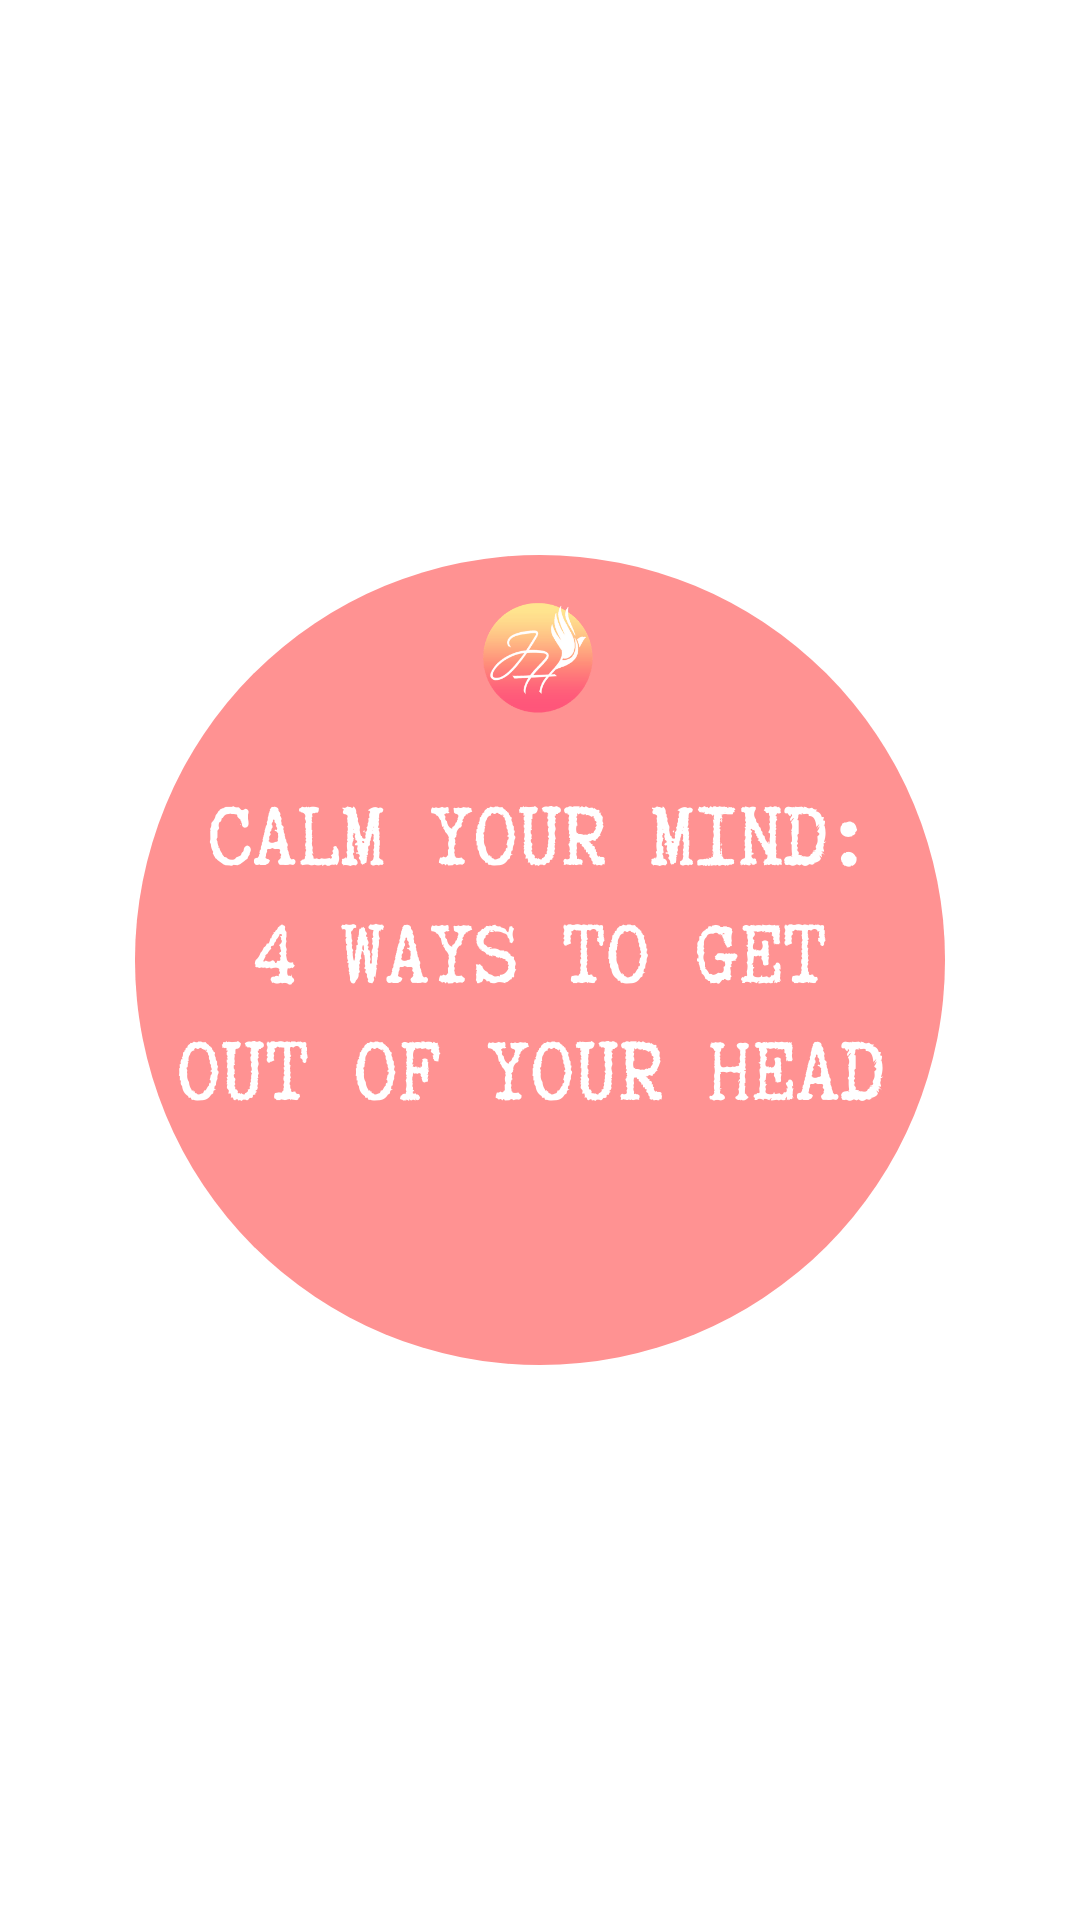 CALM YOUR MIND: 4 WAYS TO GET OUT OF YOUR HEAD